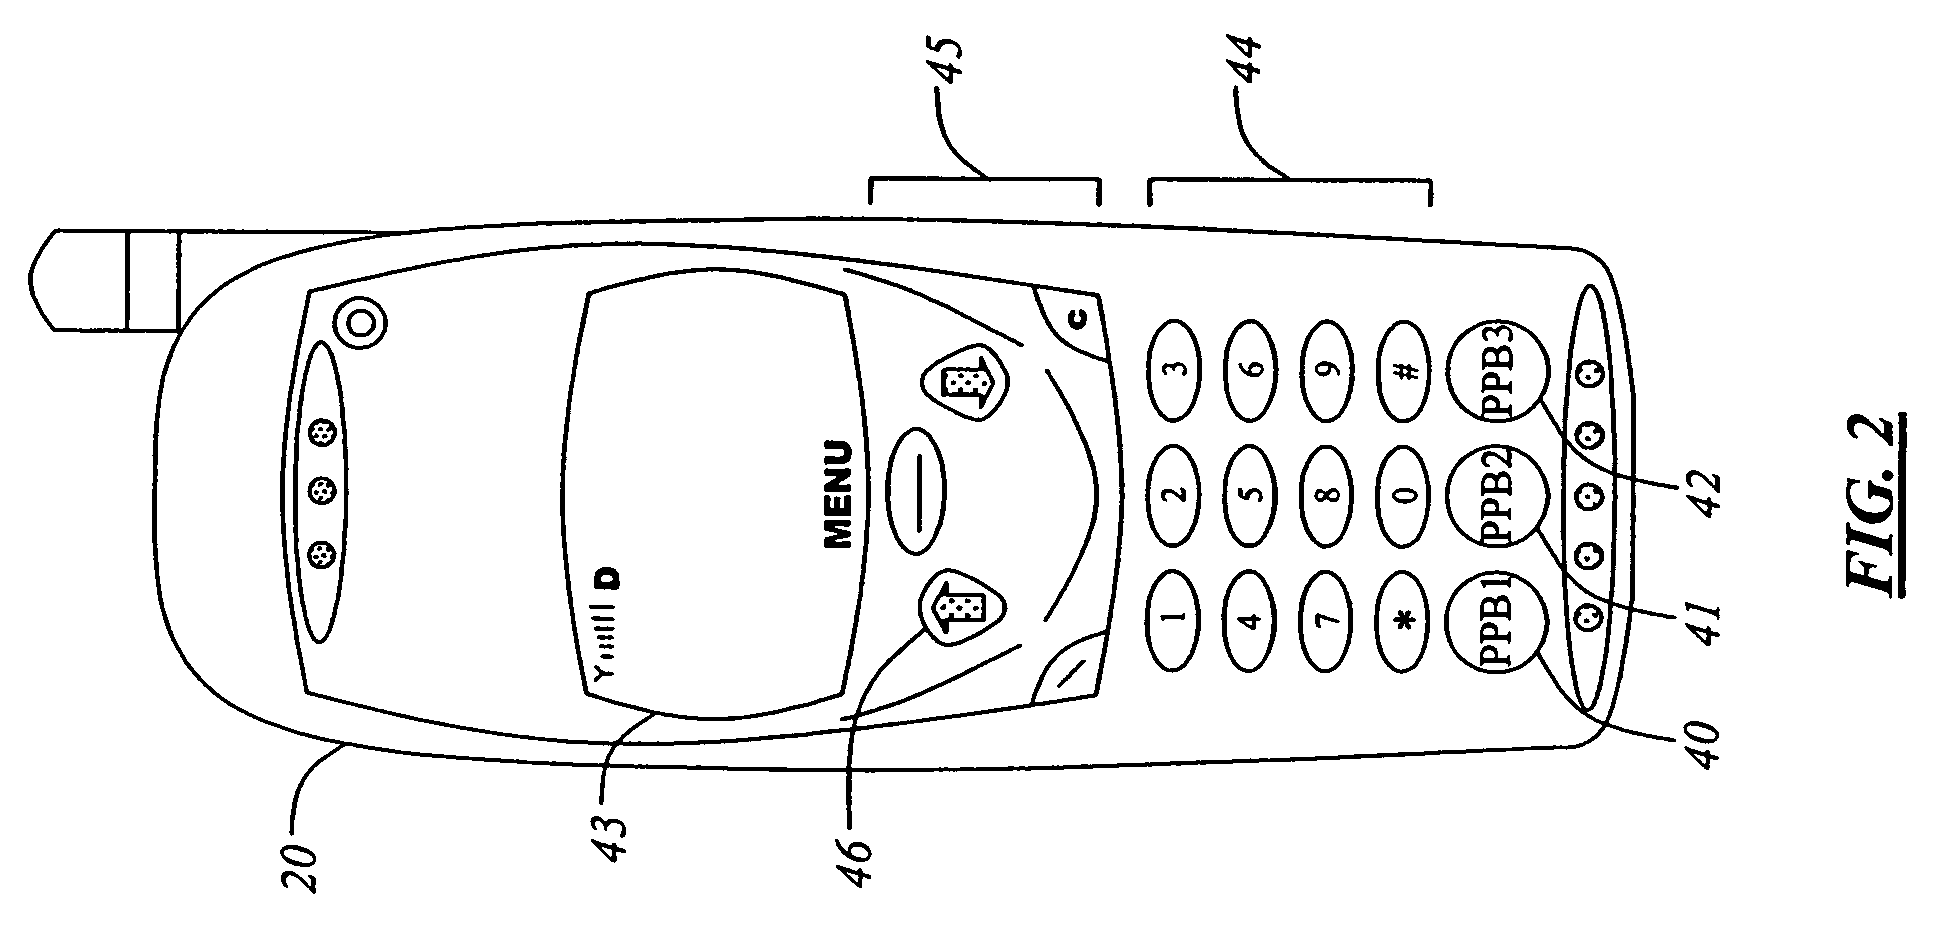 Telephone with dynamically programmable push buttons for access to advanced applications